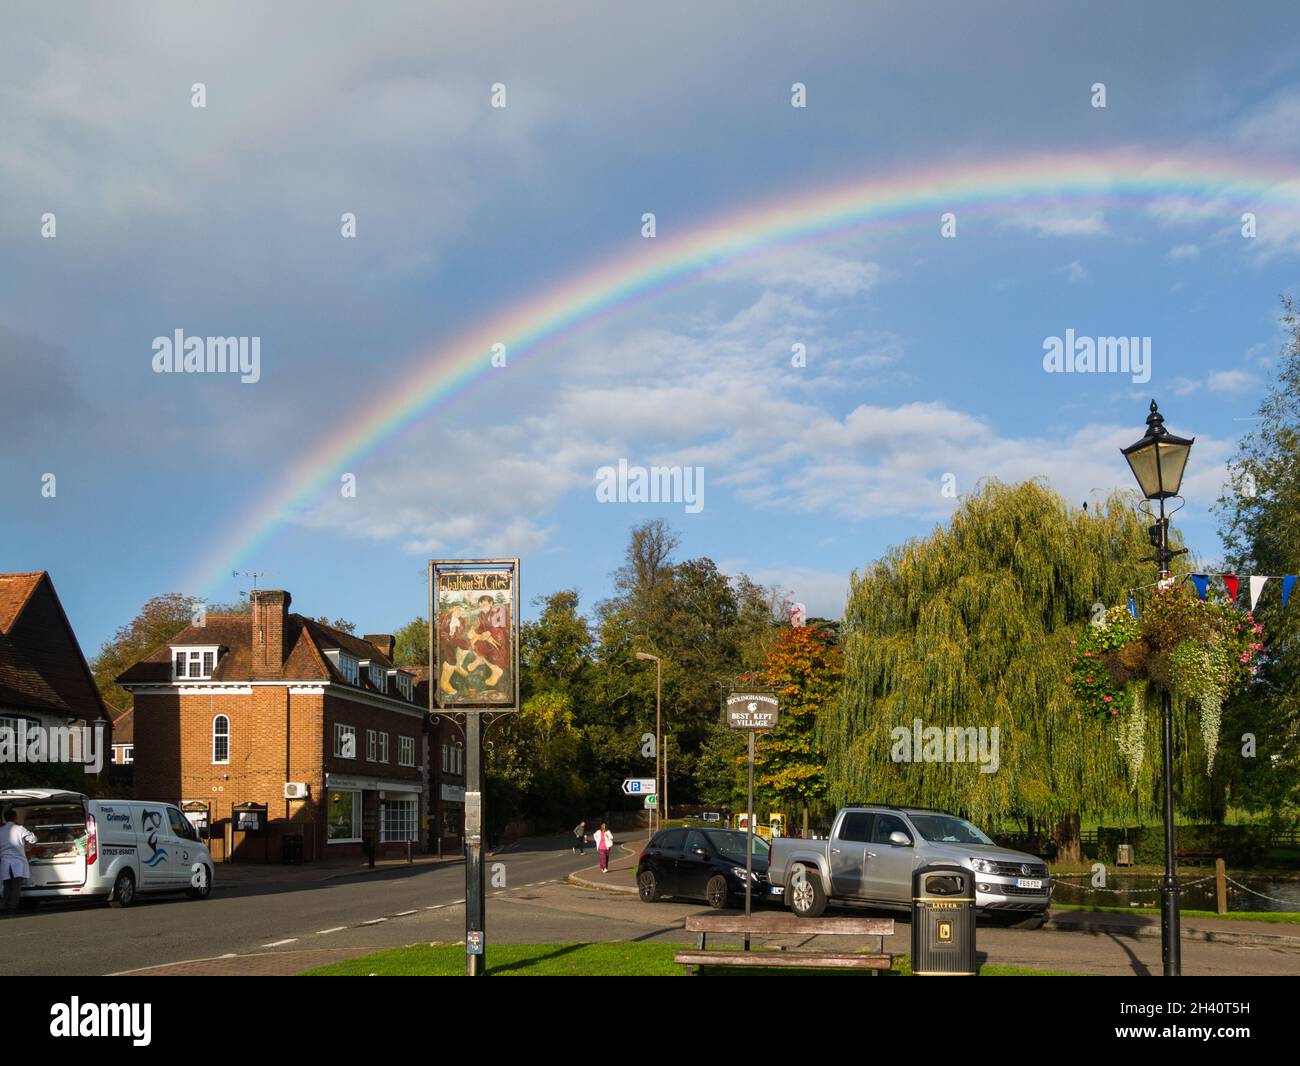 Main street duckpond and village sign with rainbow Chalfont St Giles Buckinghamshire England UK Stock Photo